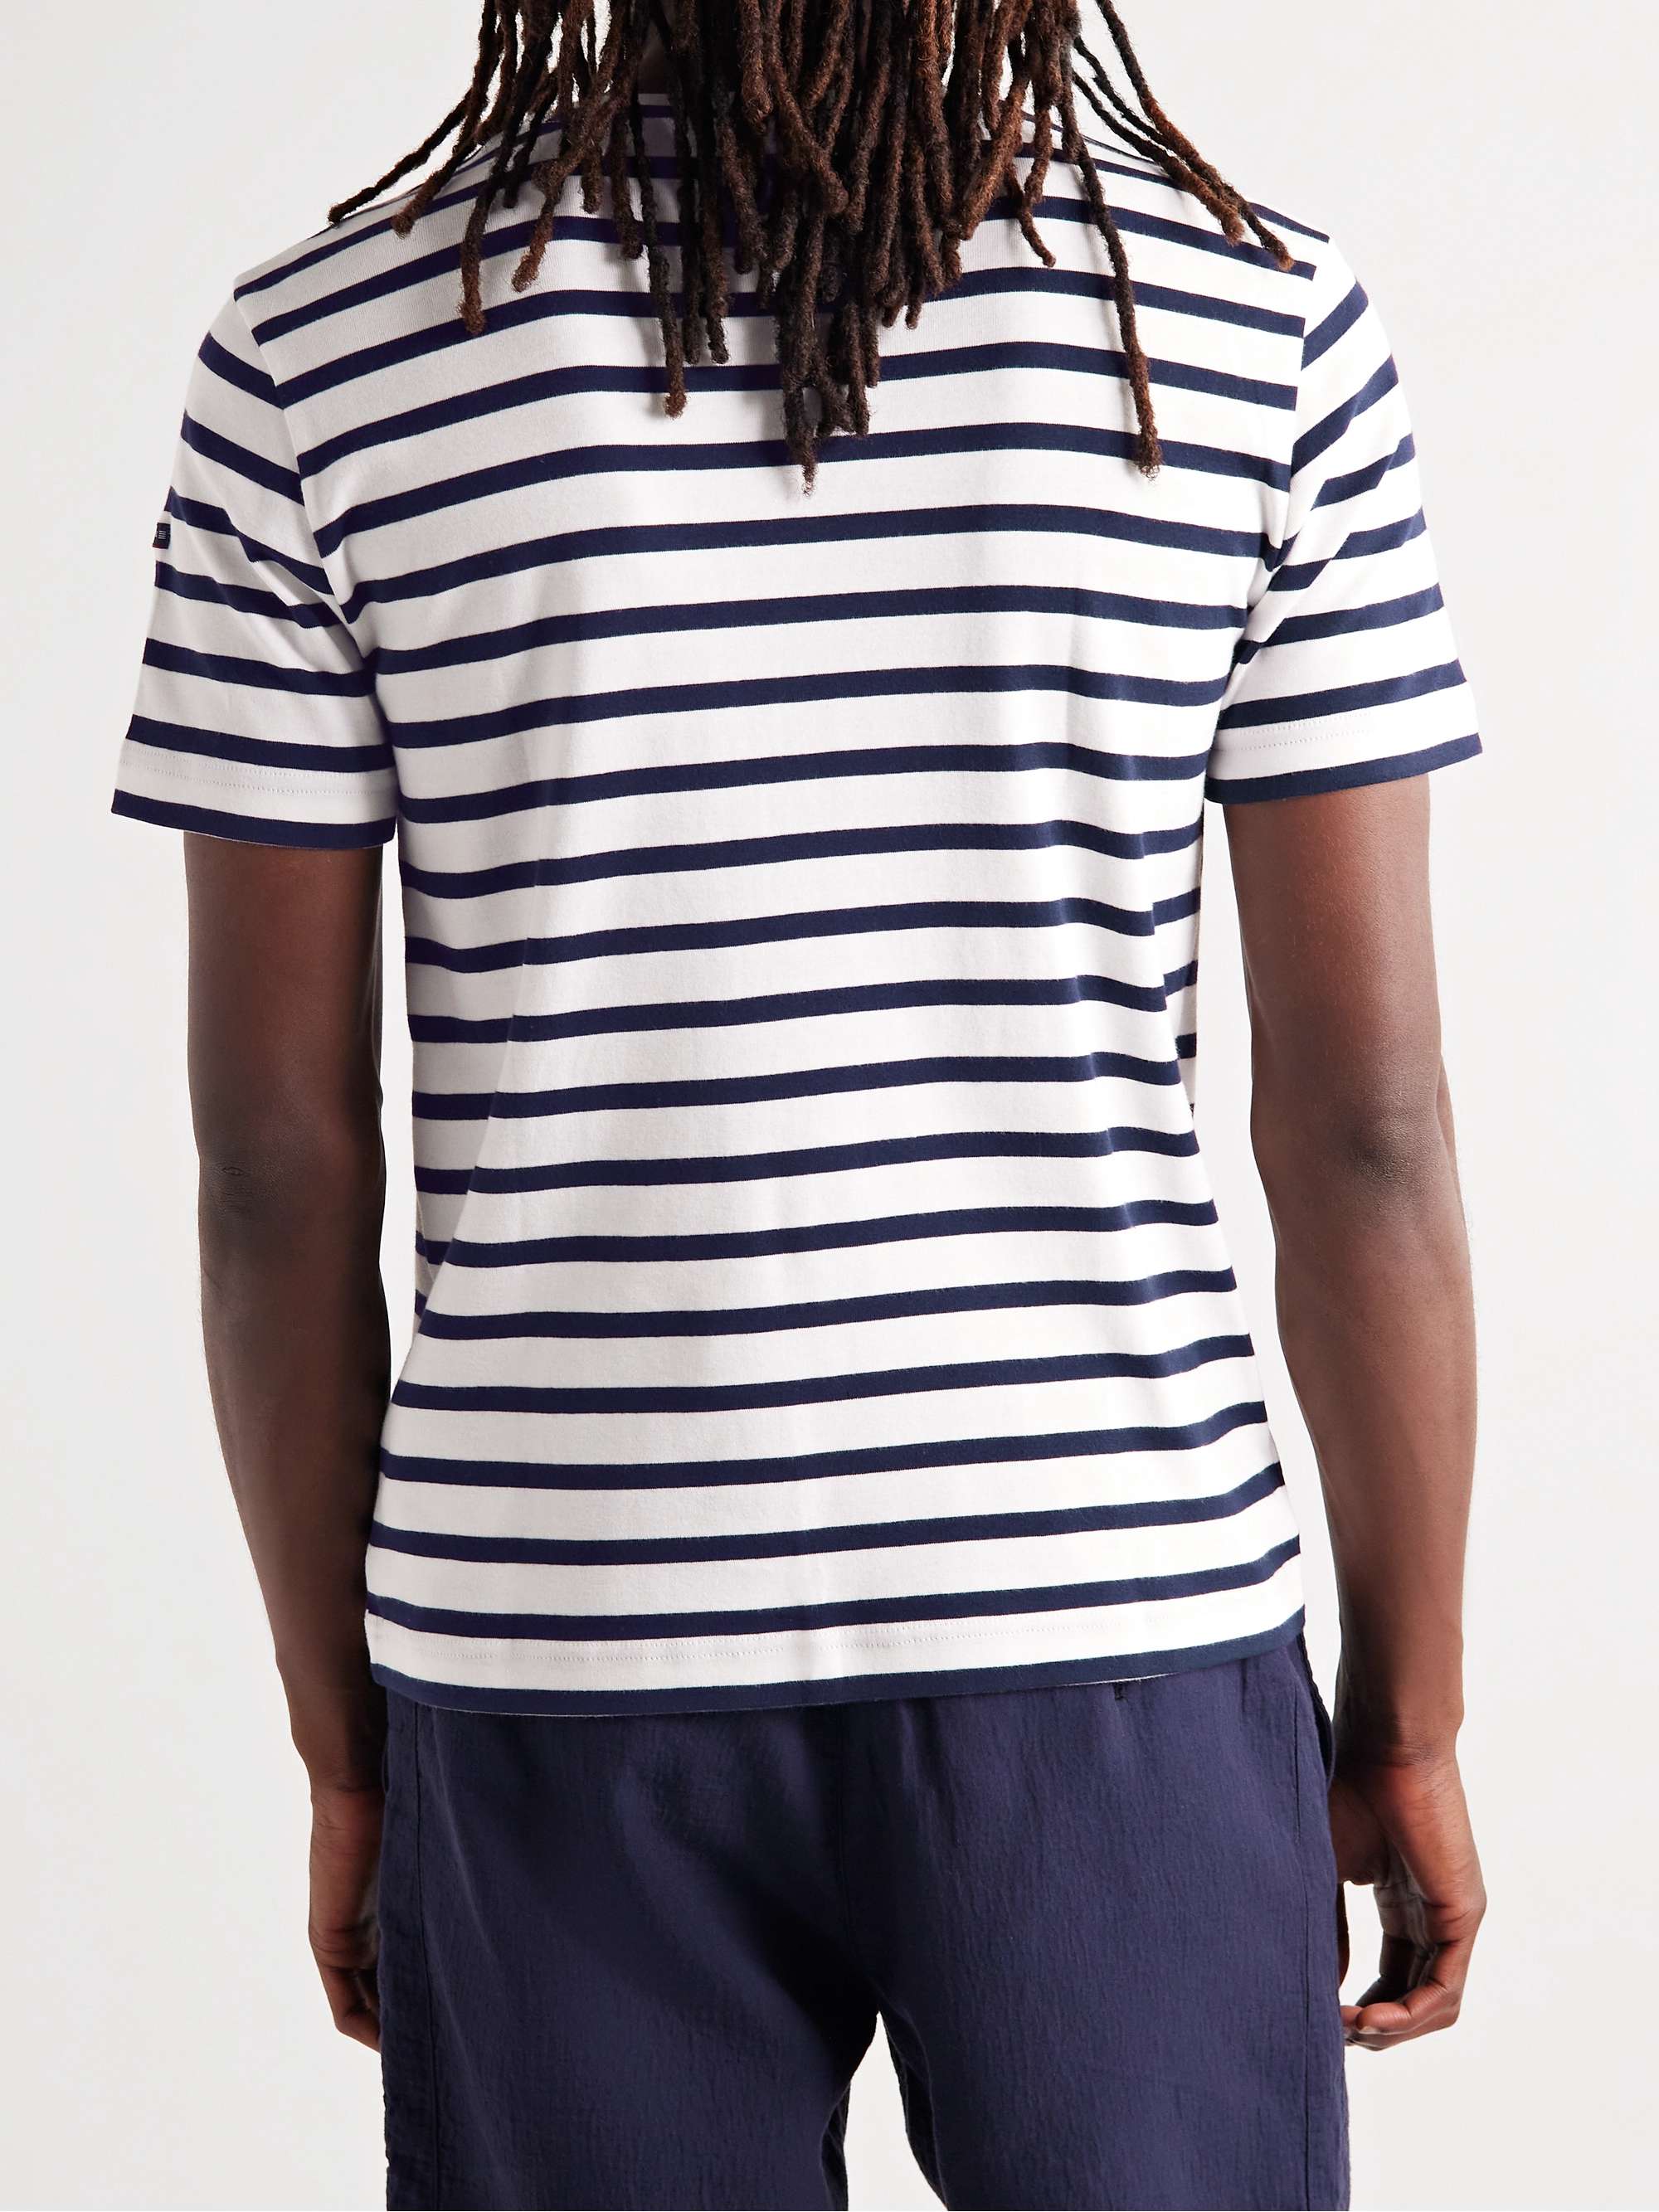 ARMOR-LUX Slim-Fit Striped Cotton-Jersey T-Shirt